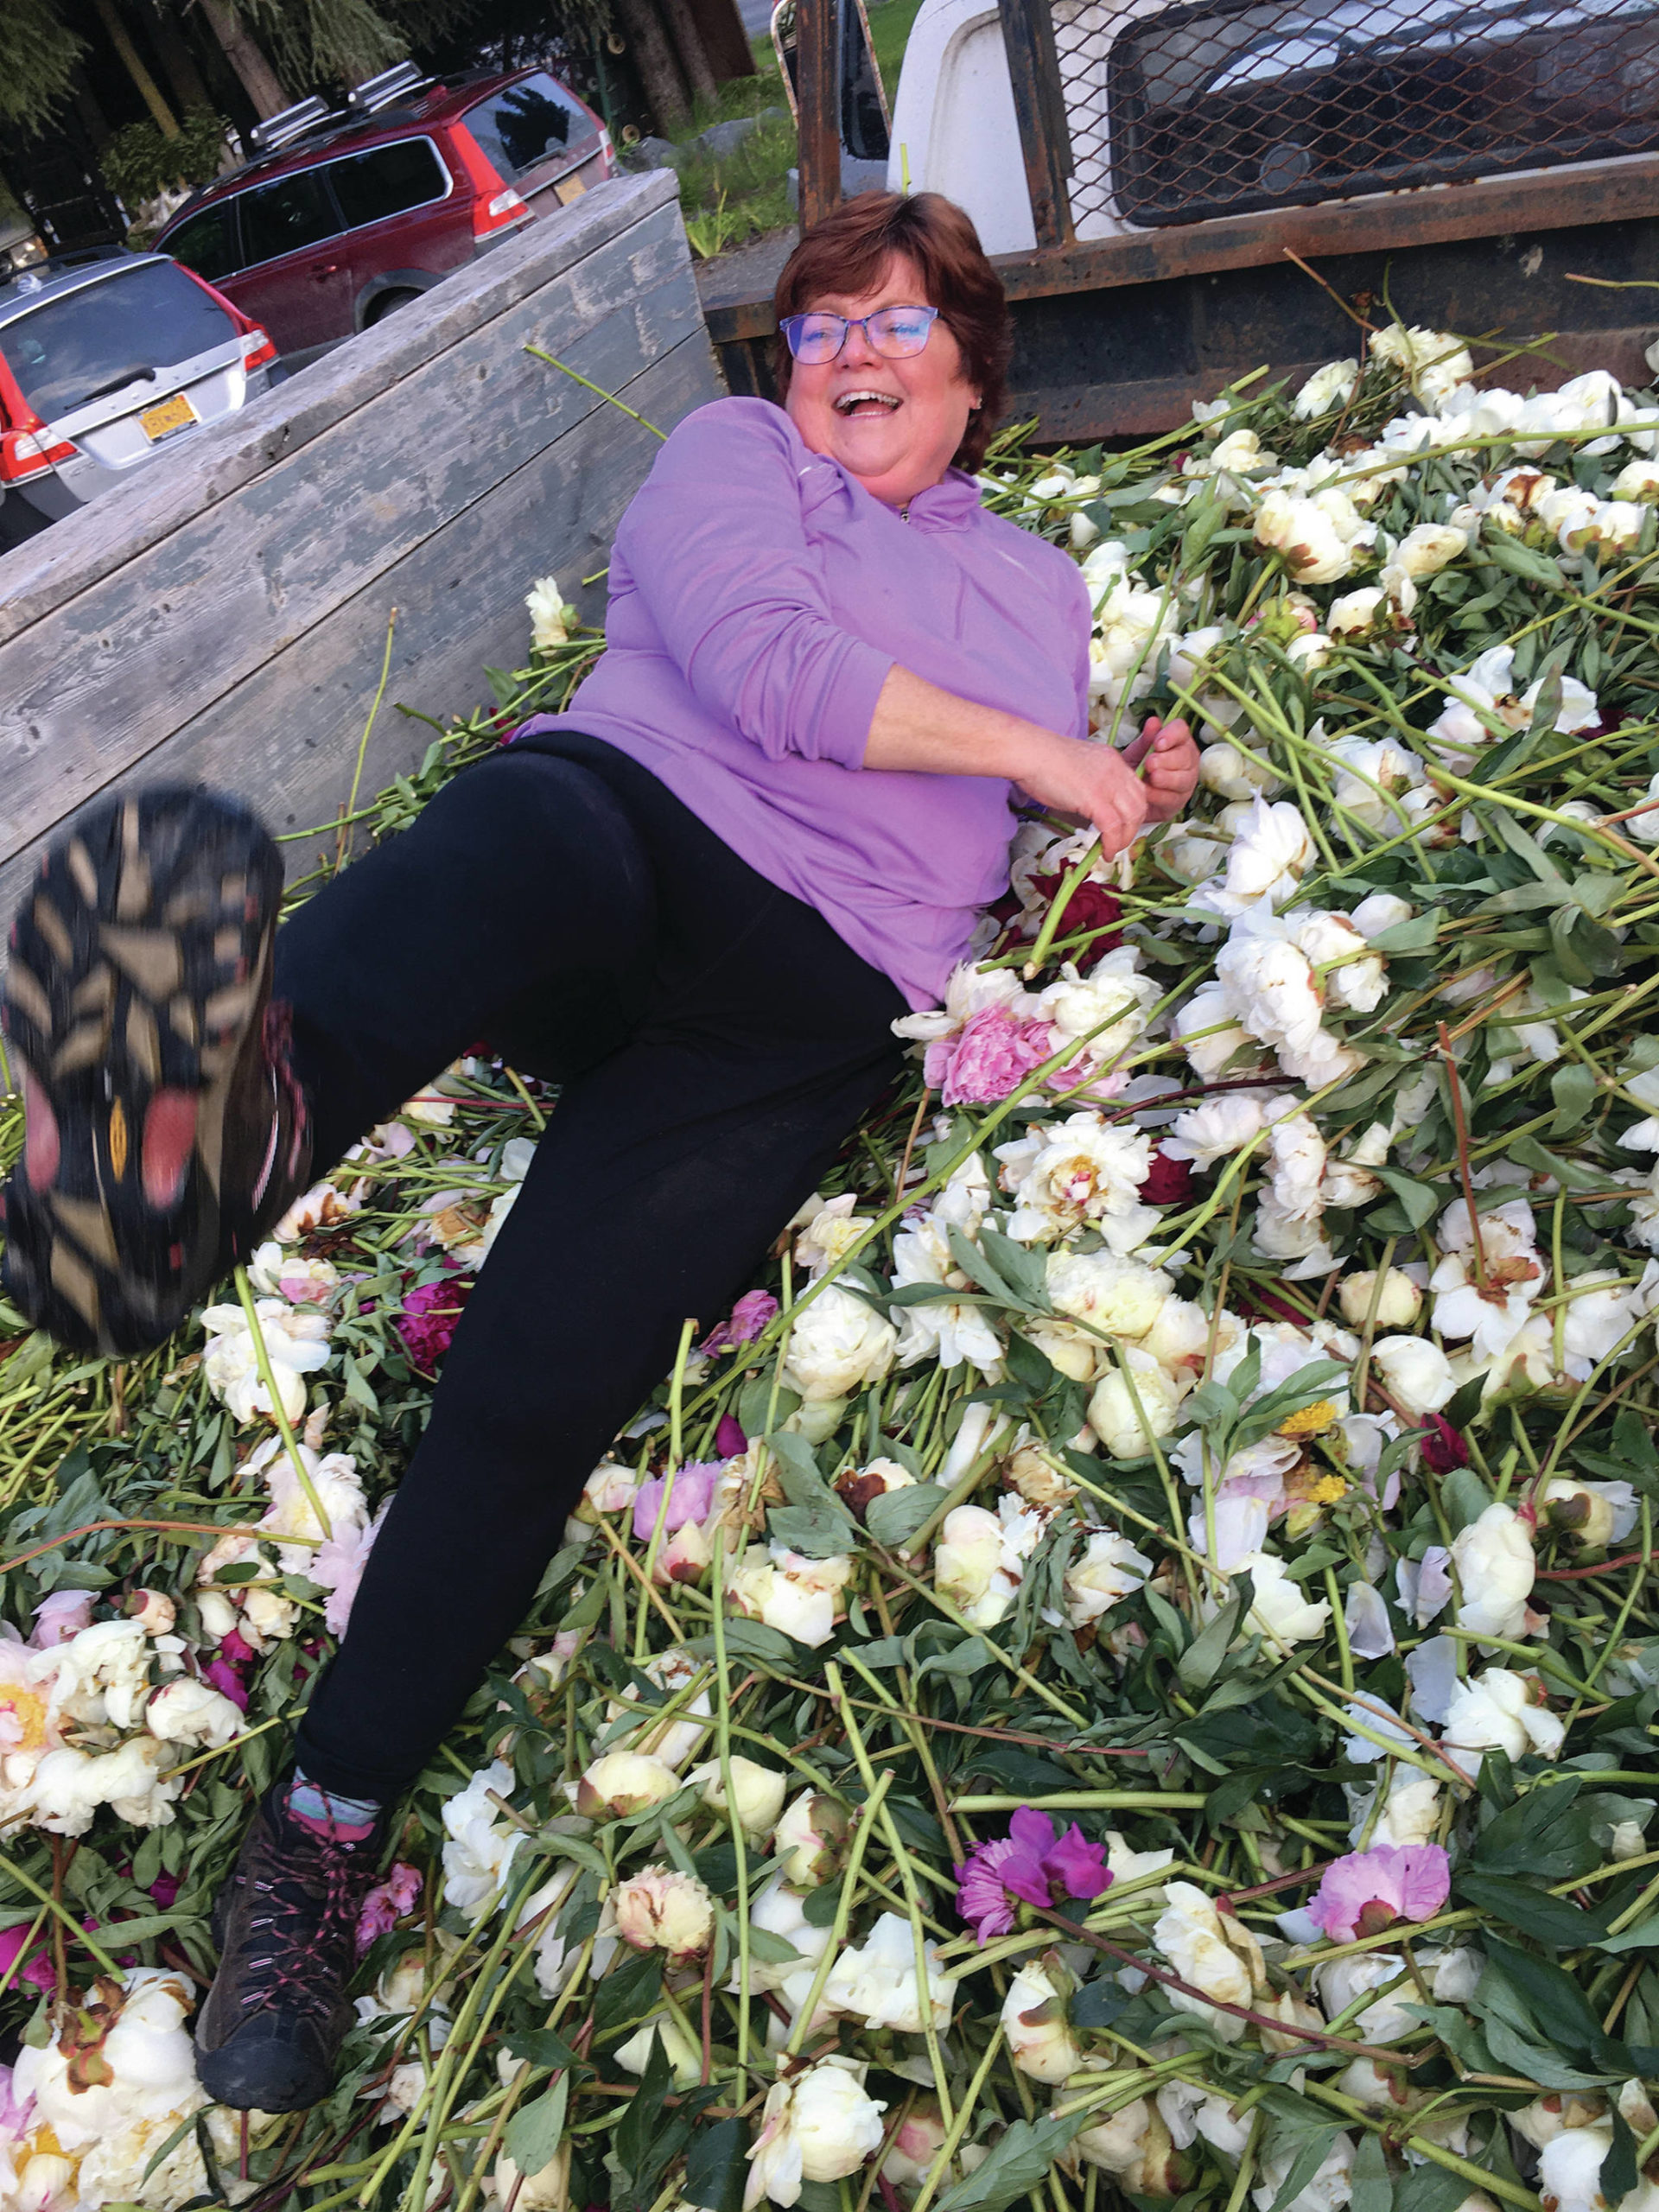 Teri Robl lies in the bed of a pickup truck with peonies destined for the compost pile on Aug. 7, 2020, in Fritz Creek, Alaska. (Photo by Julie Shaw)